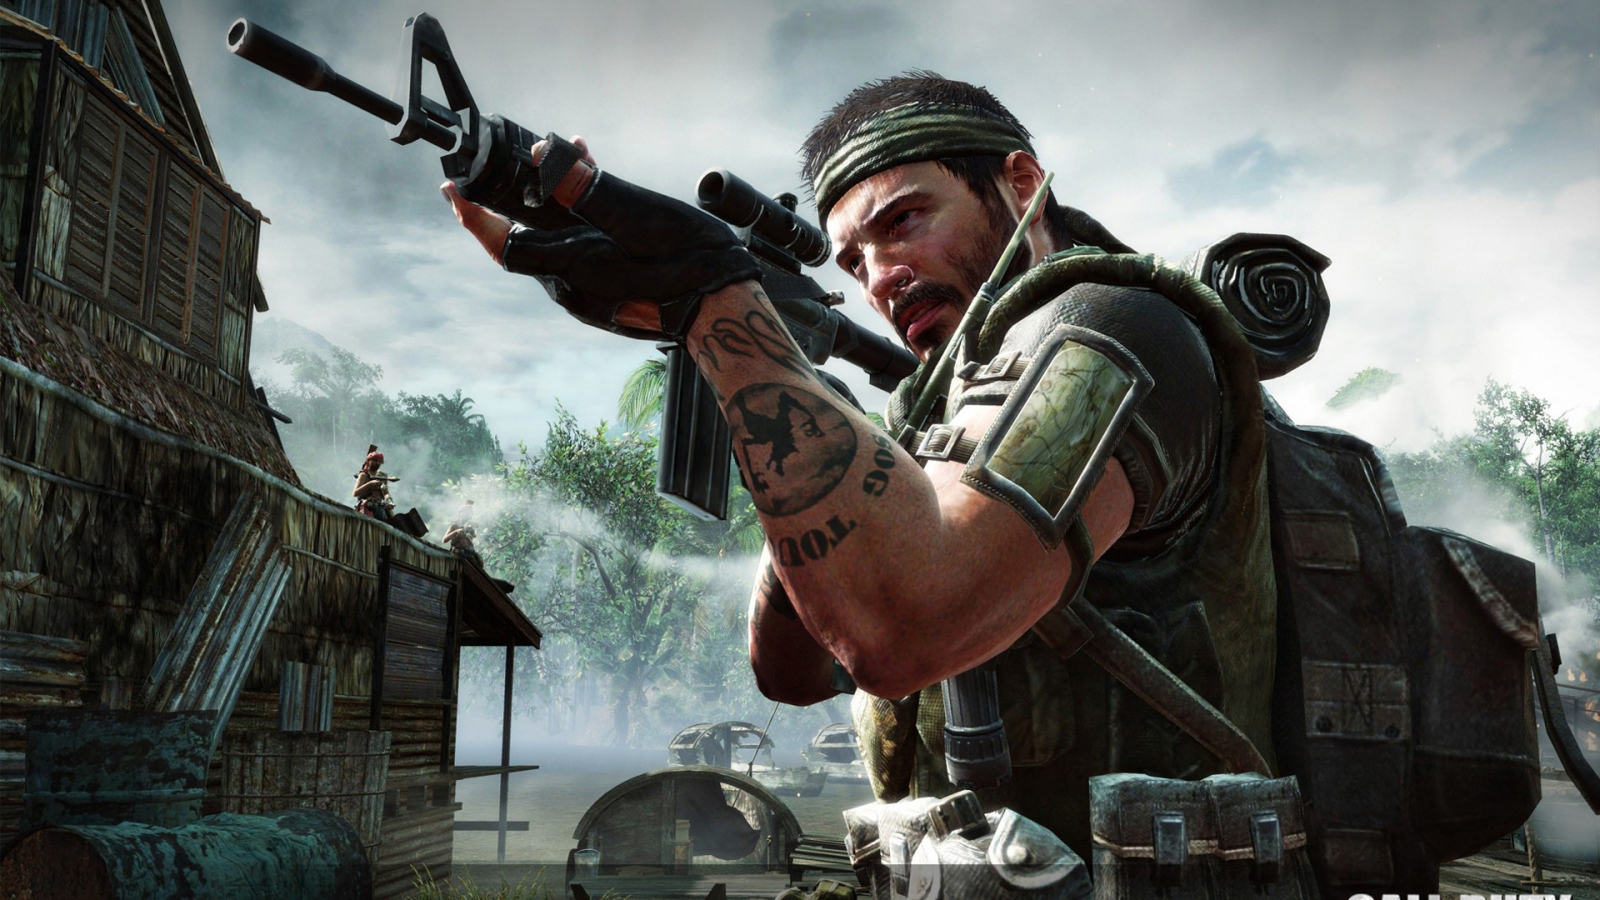 Call of Duty Black Ops Soldier for 1600 x 900 HDTV resolution